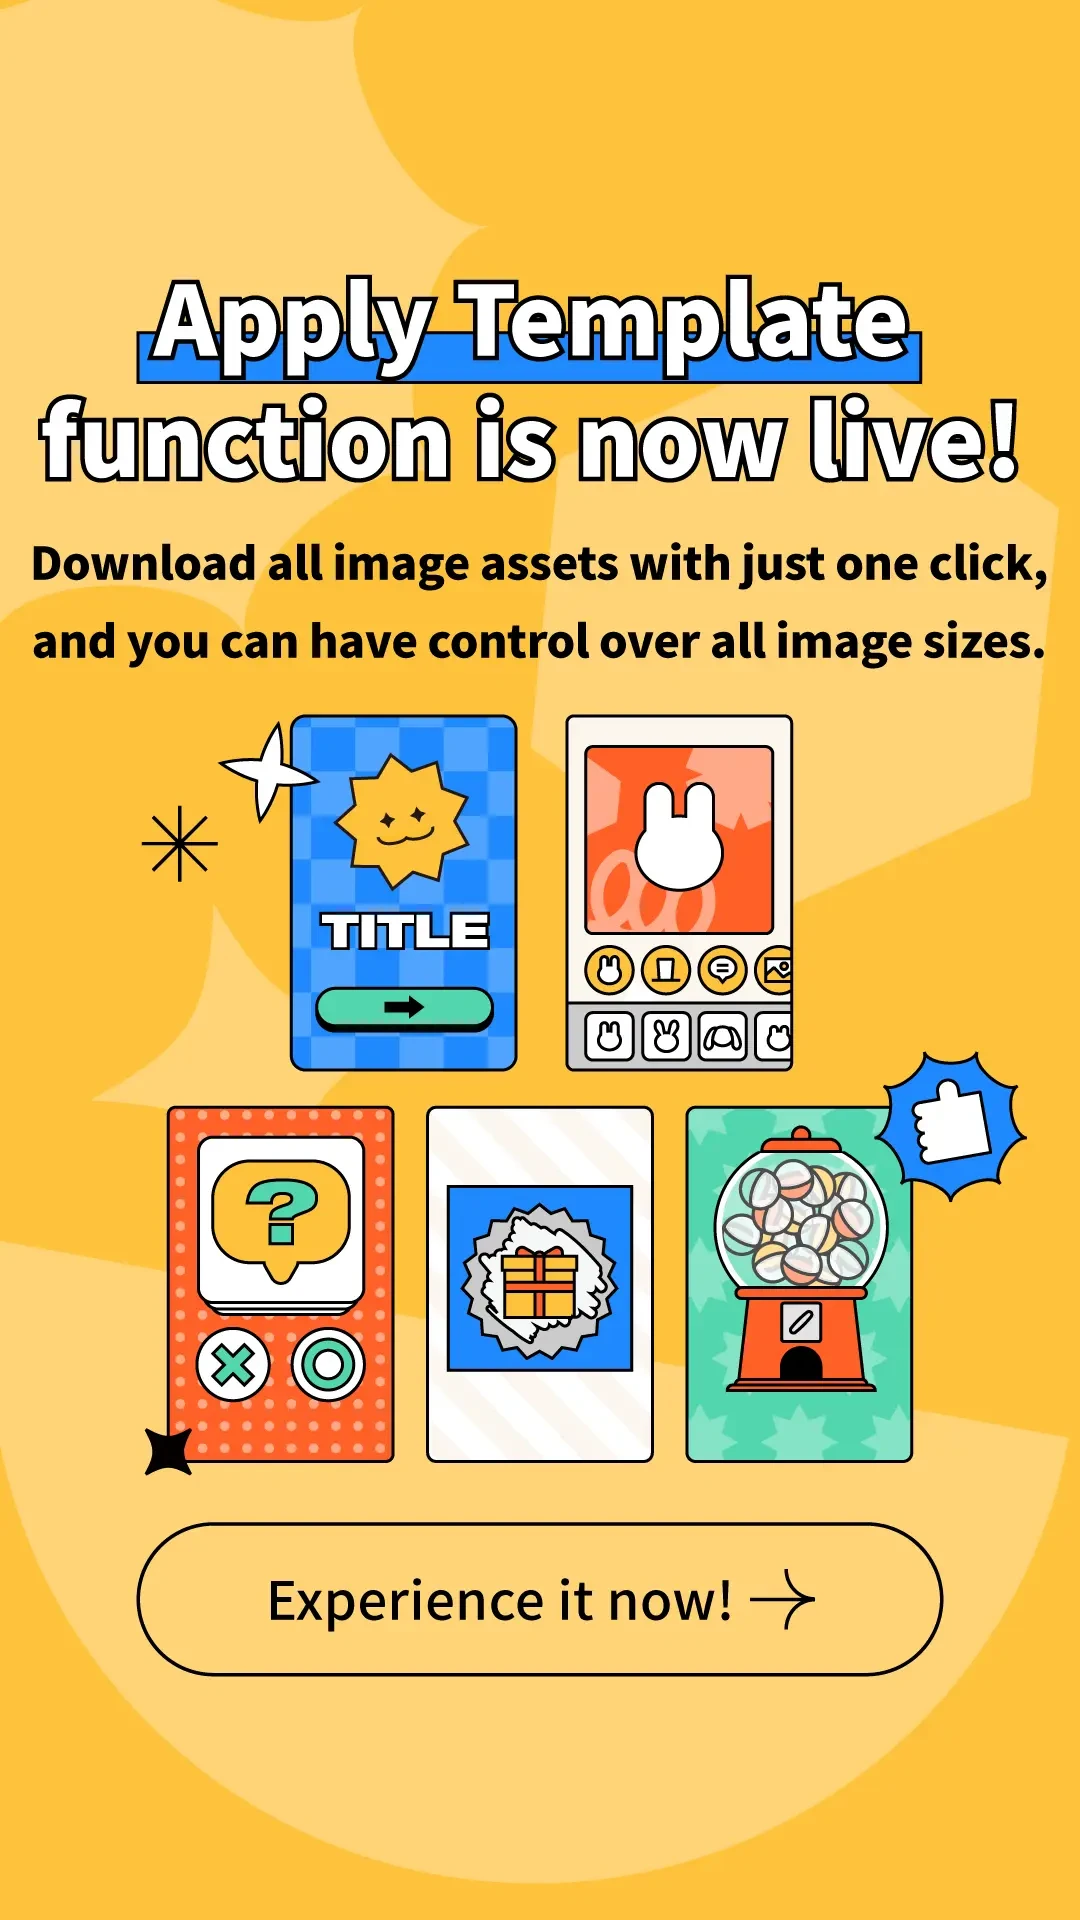 Apply Template function is now live! Download all image assets with just one click, and you can have control over all image sizes.